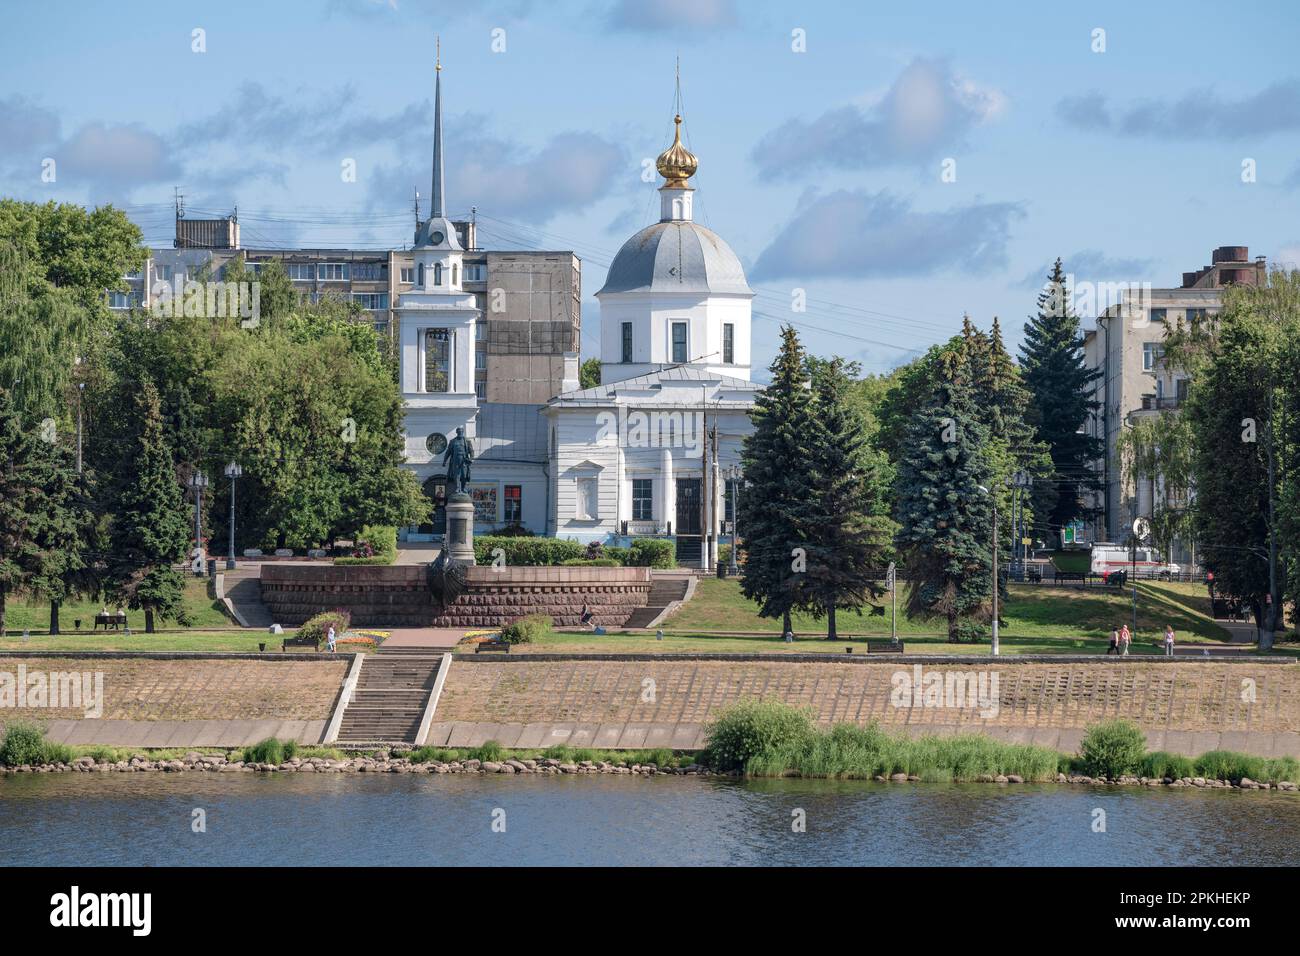 TVER, RUSSIA - JULY 15, 2022: View of the monument to the Russian traveler Afanasy Nikitin and the Church of the Resurrection of Christ on a July afte Stock Photo